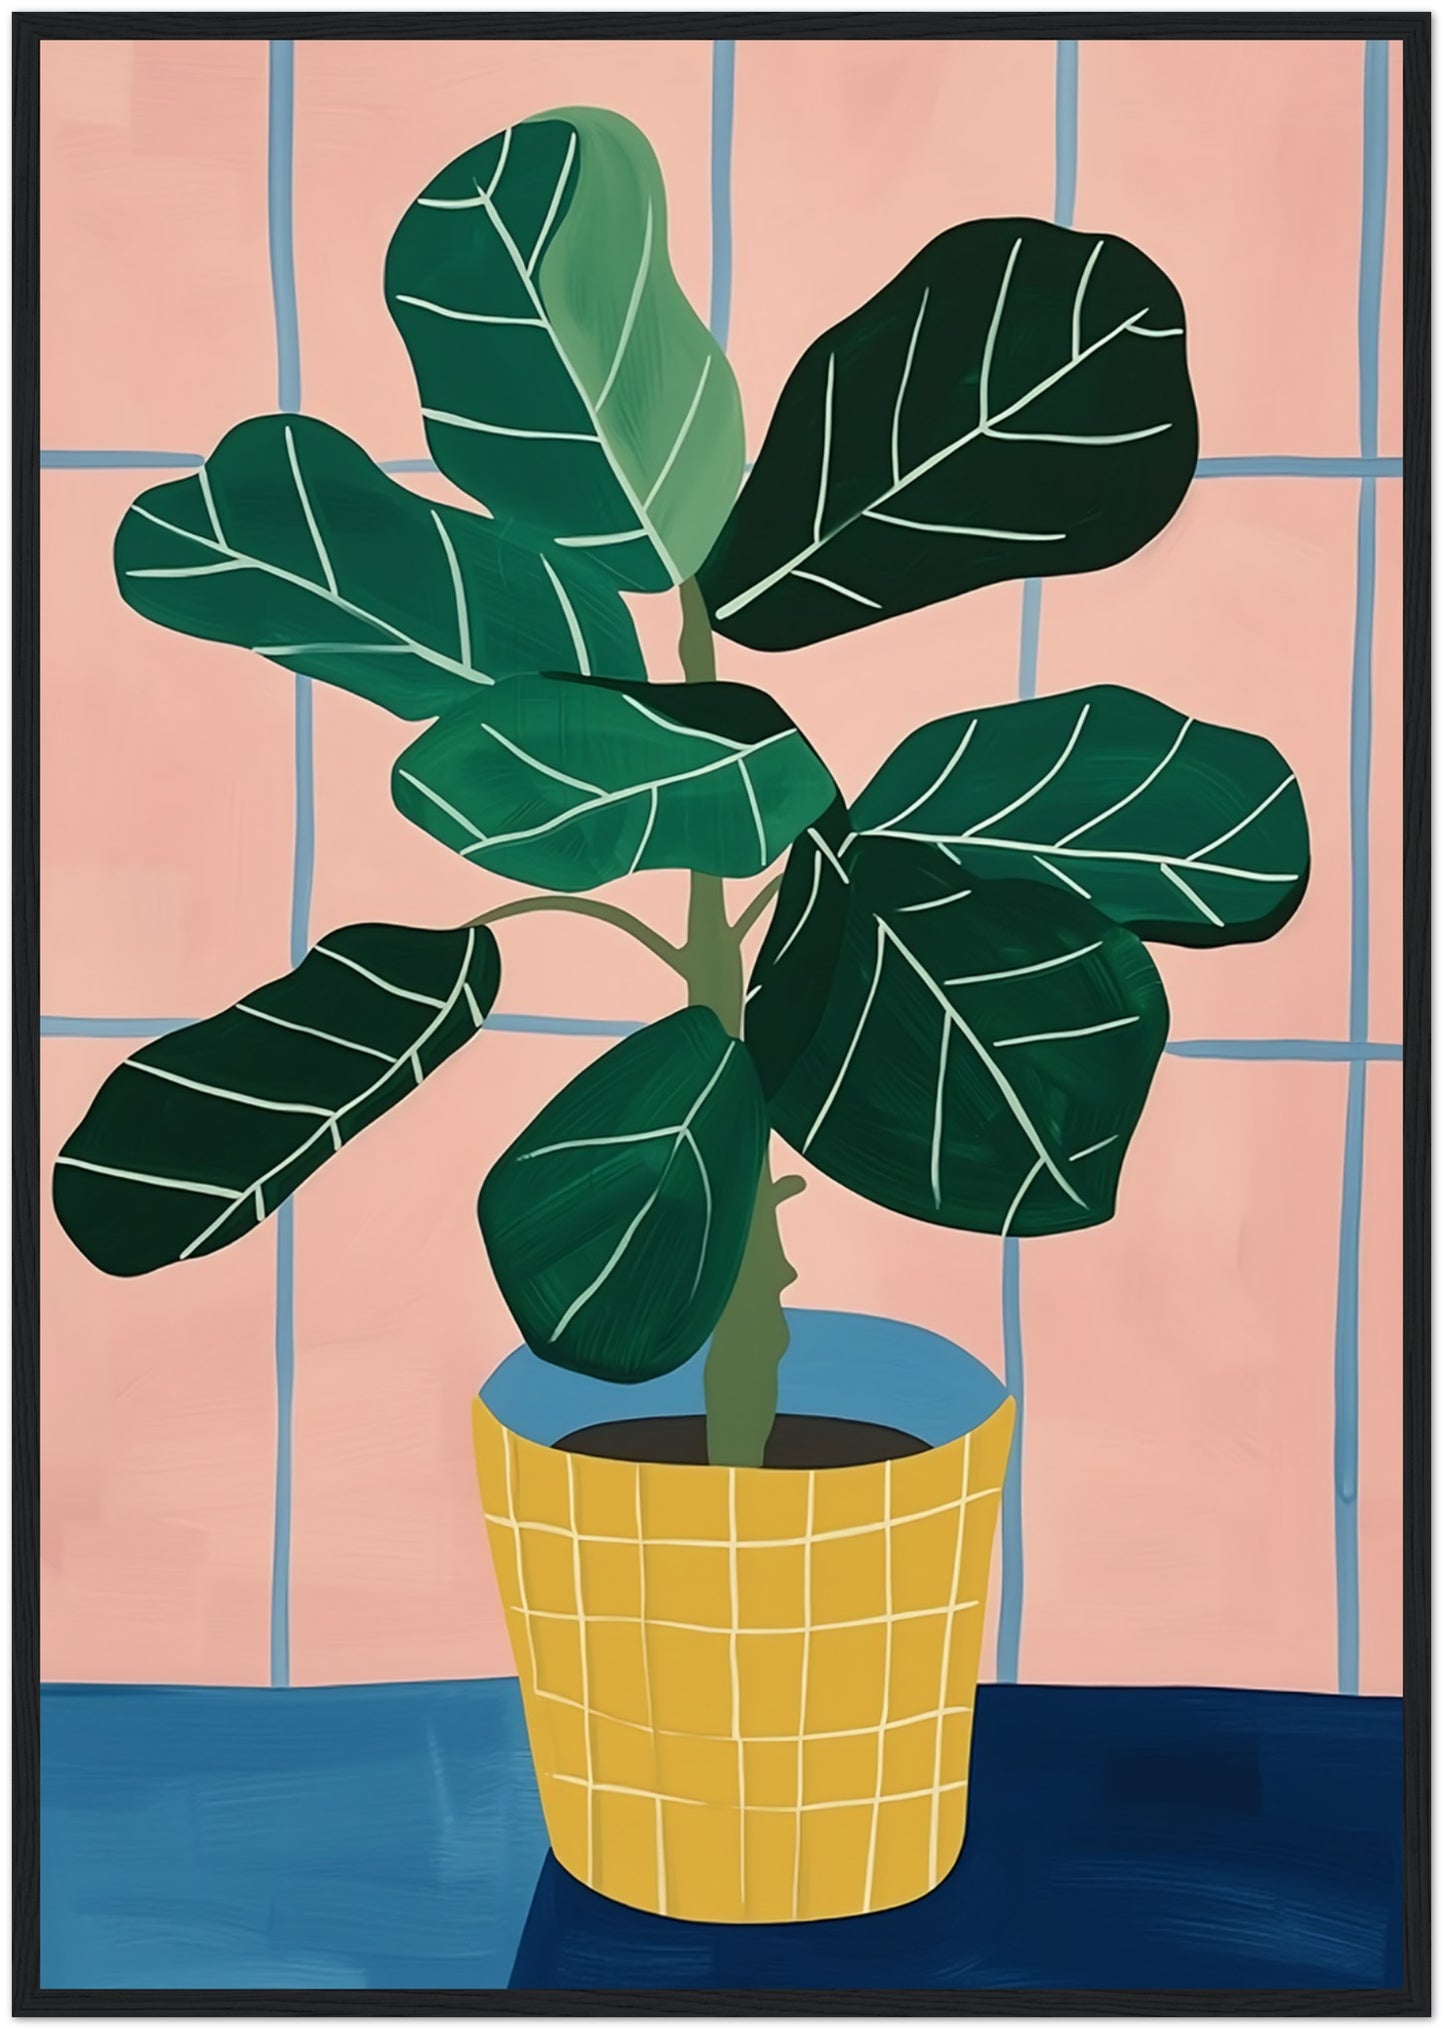 Illustration of a potted plant with large green leaves against a pink grid background.